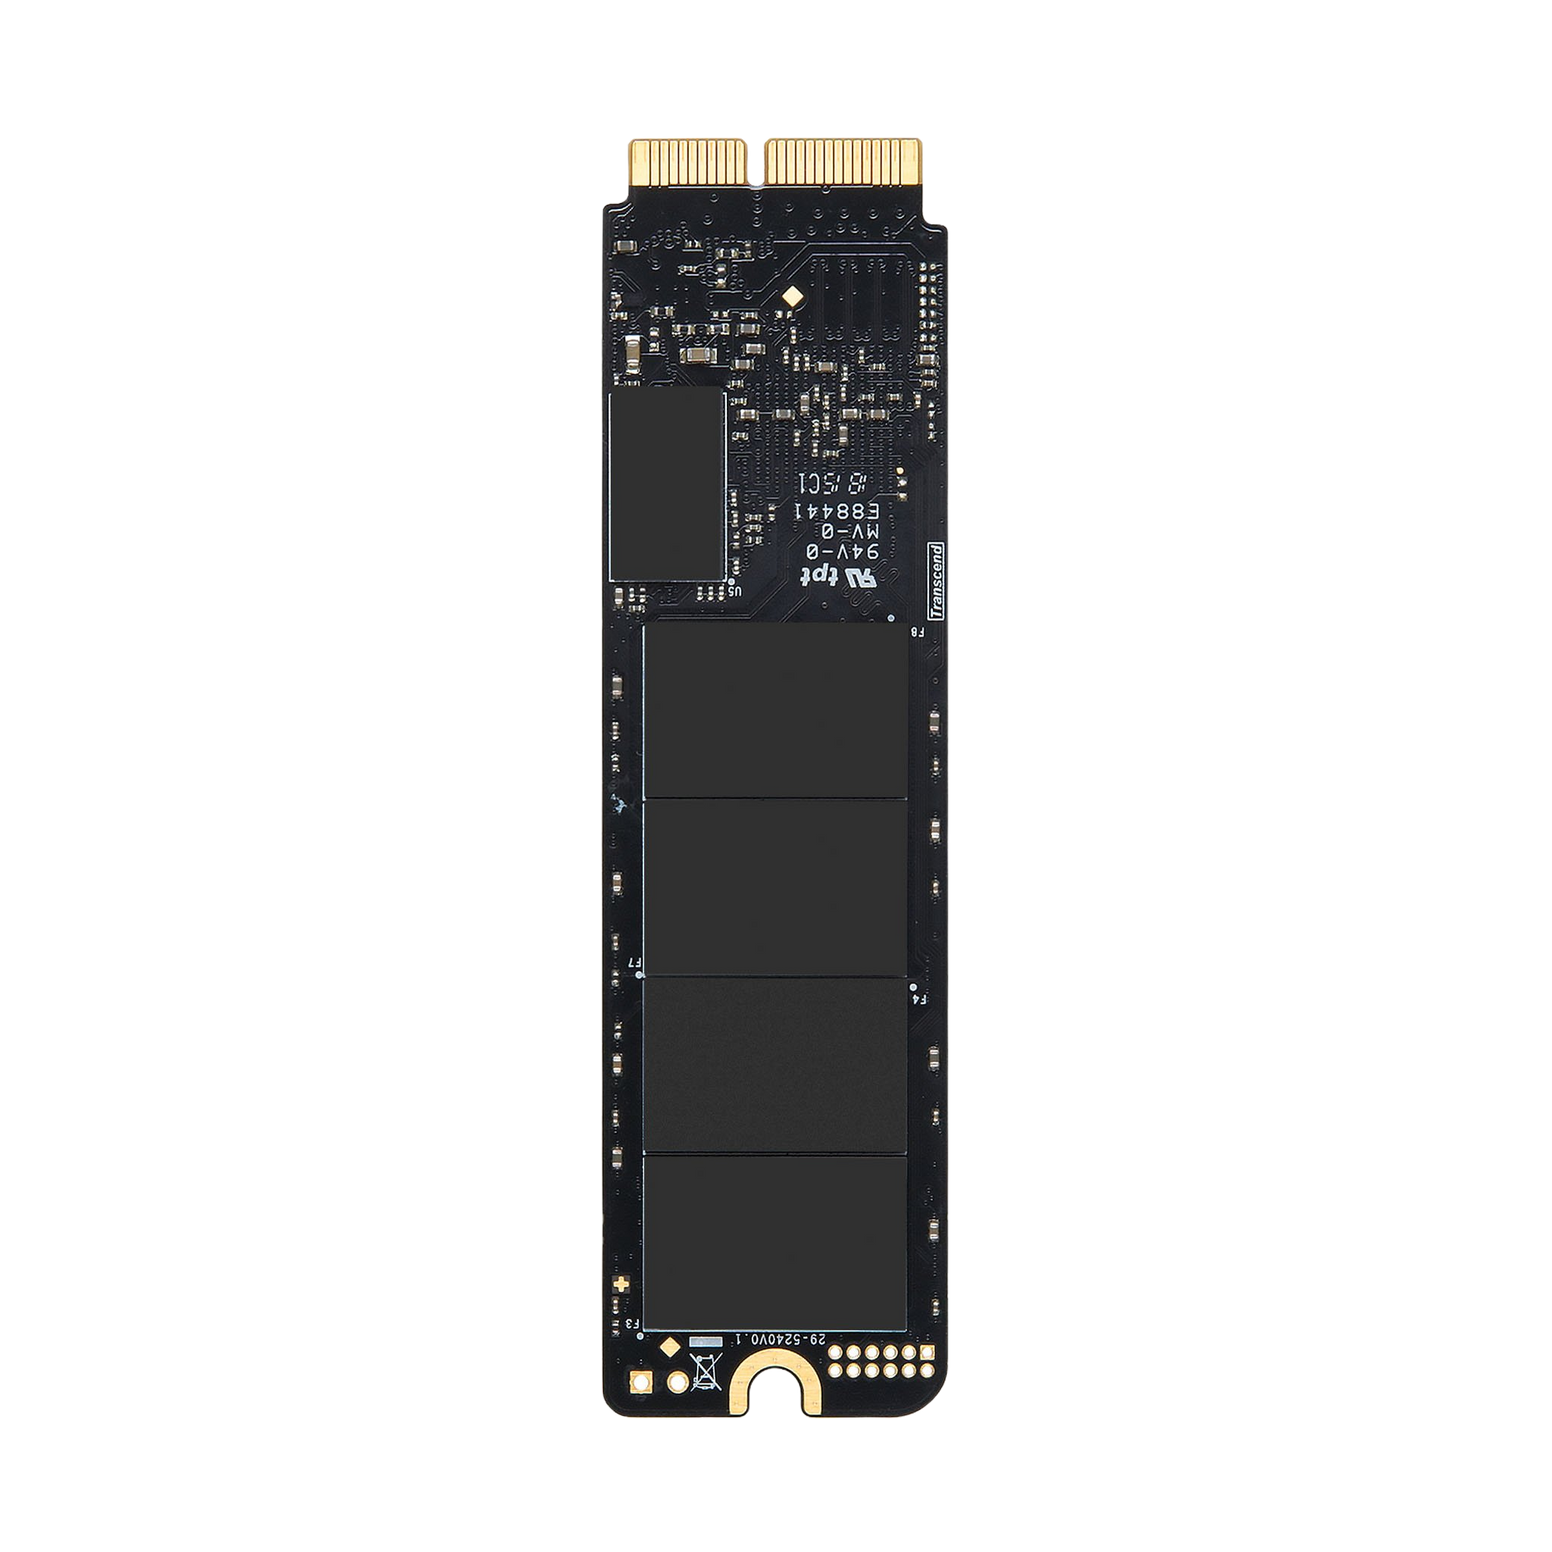 Transcend 960GB Jet Drive 850 SSD Only for MacBook Pro (Late 2013 - Early 2015), MacBook Air (Mid 2013 - Early 2015), Mac mini (Late 2014), Mac Pro (Late 2013) - NVMe Gen3 x4